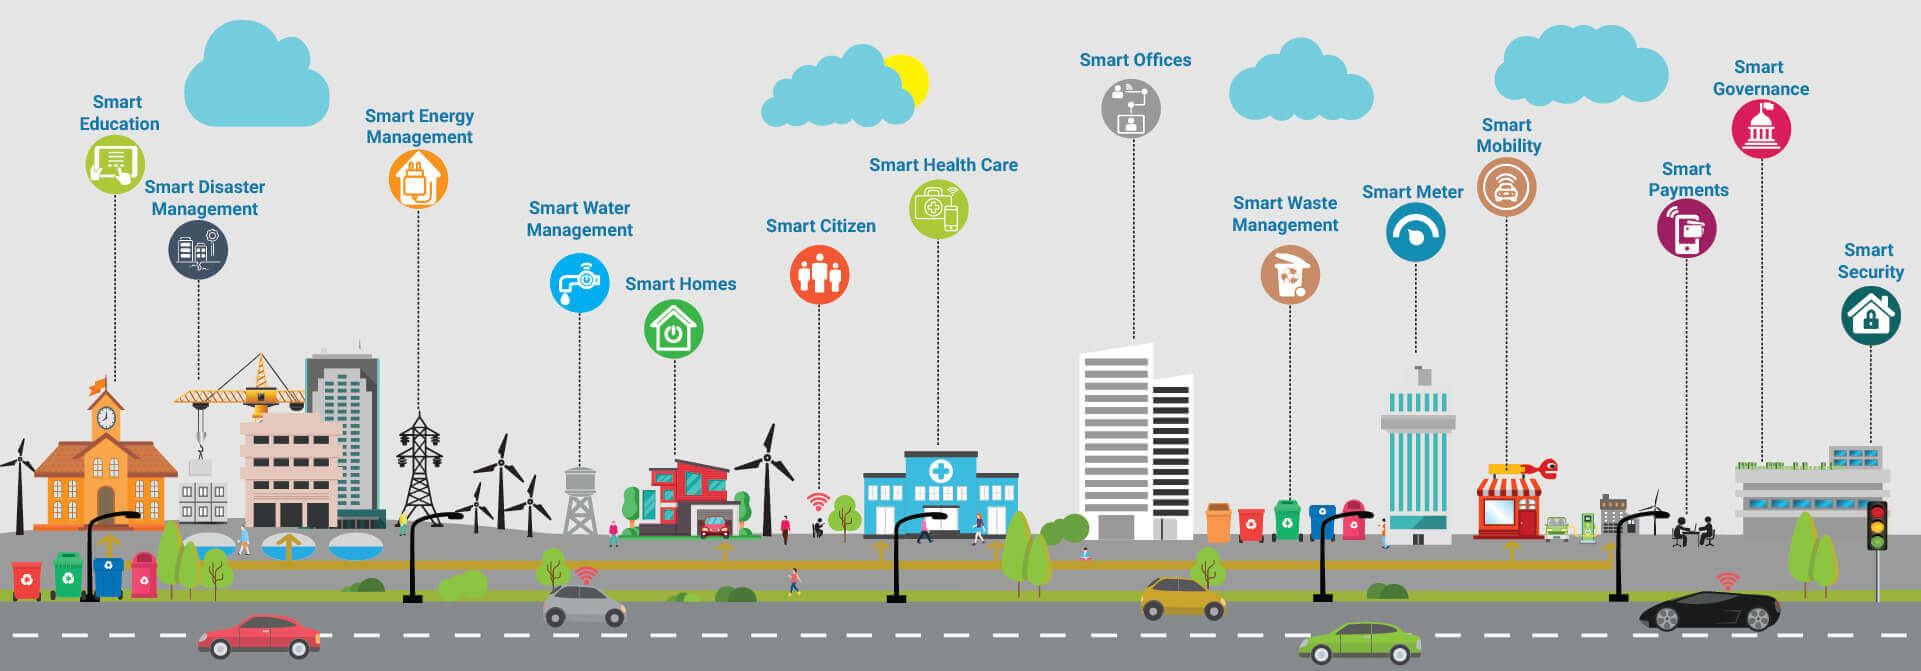 Smart City solutions | Smart City Technology for Sustainable Urbanization